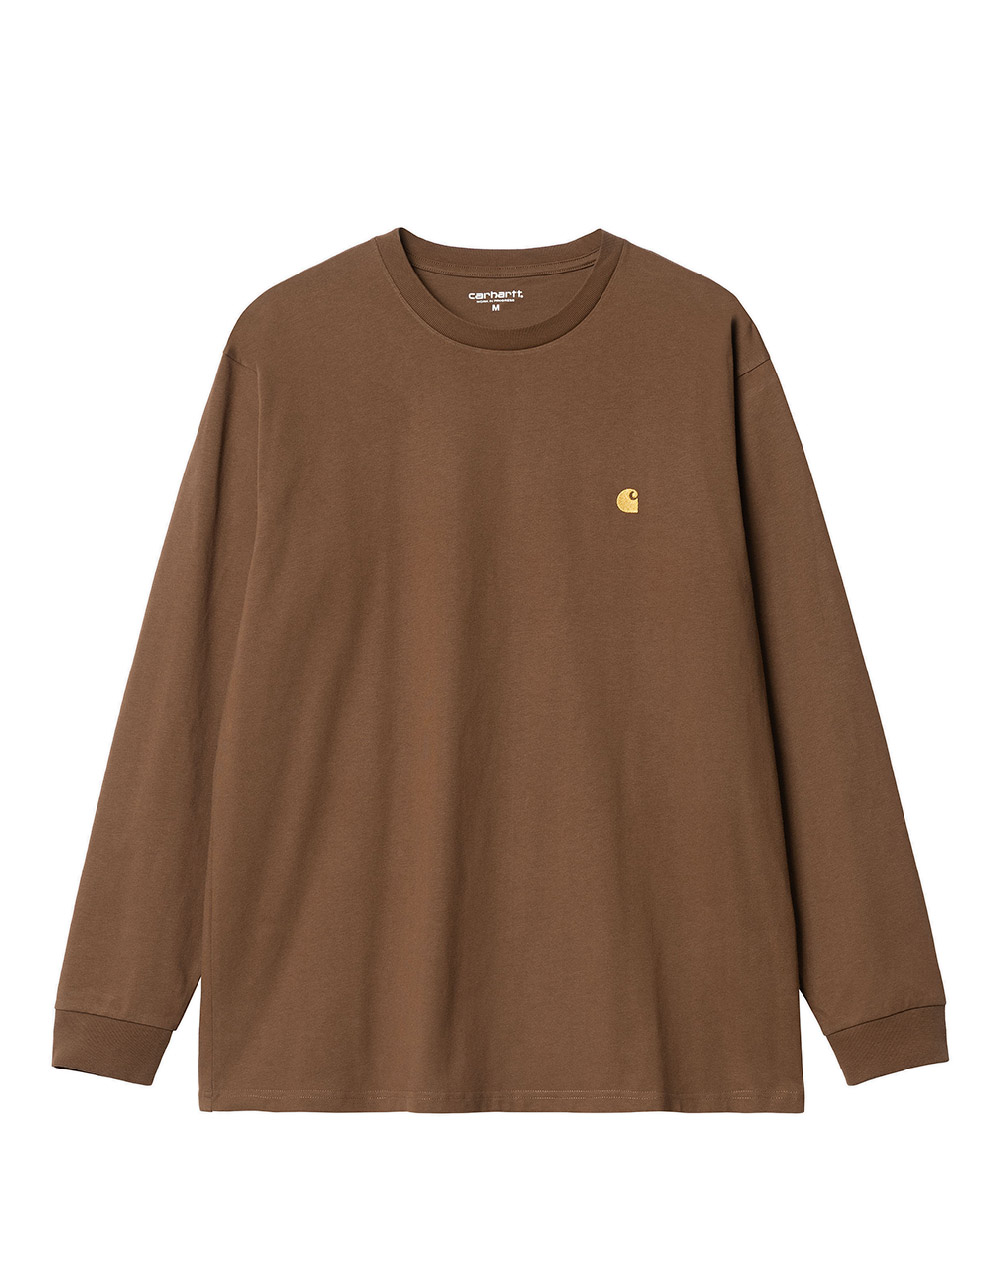 Carhartt WIP –  L/S Chase T-Shirt